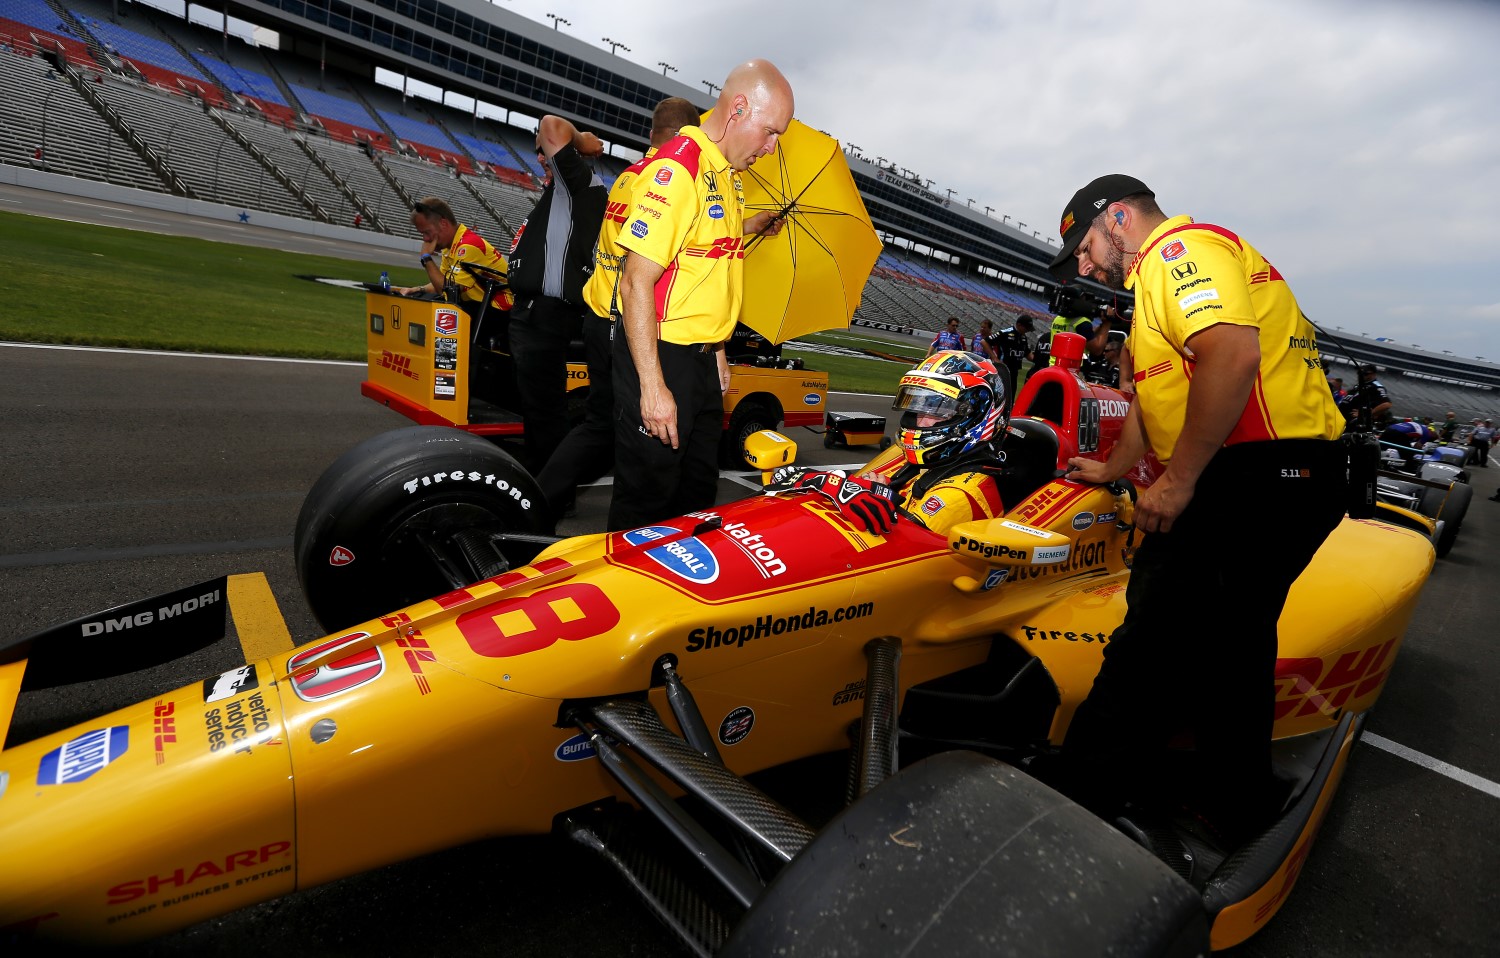 It was a weekend to forget for Ryan Hunter-Reay and the Andretti team. 3 of the 4 Andretti cars had no sponsor - which happens when TV ratings are minuscule on NBCSN